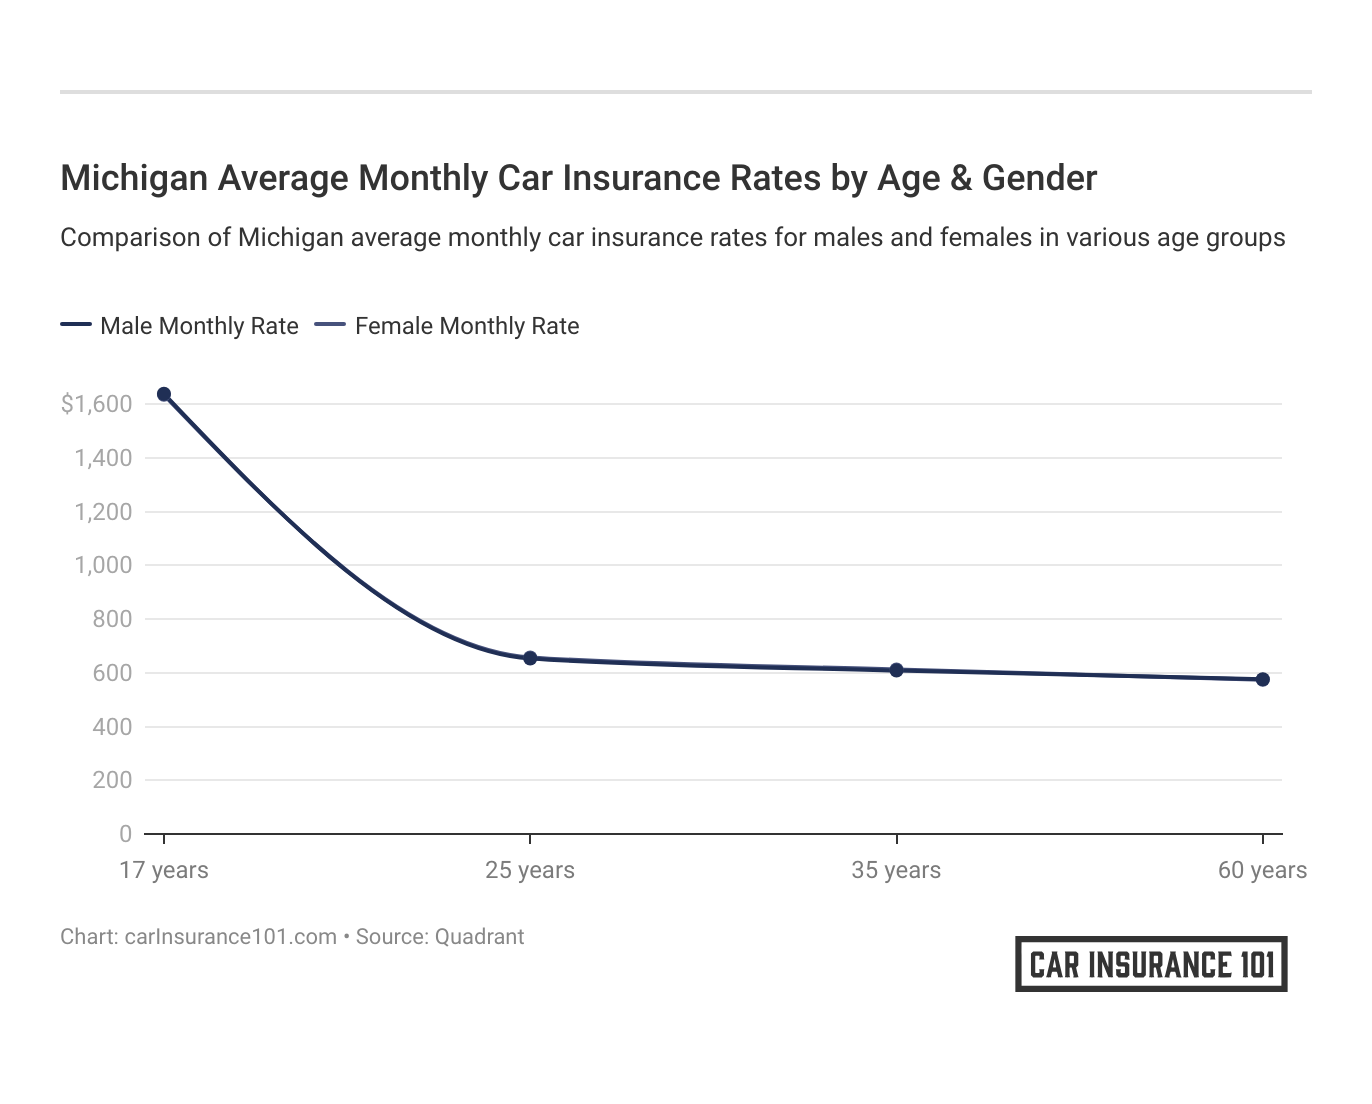 <h3>Michigan Average Monthly Car Insurance Rates by Age & Gender</h3>